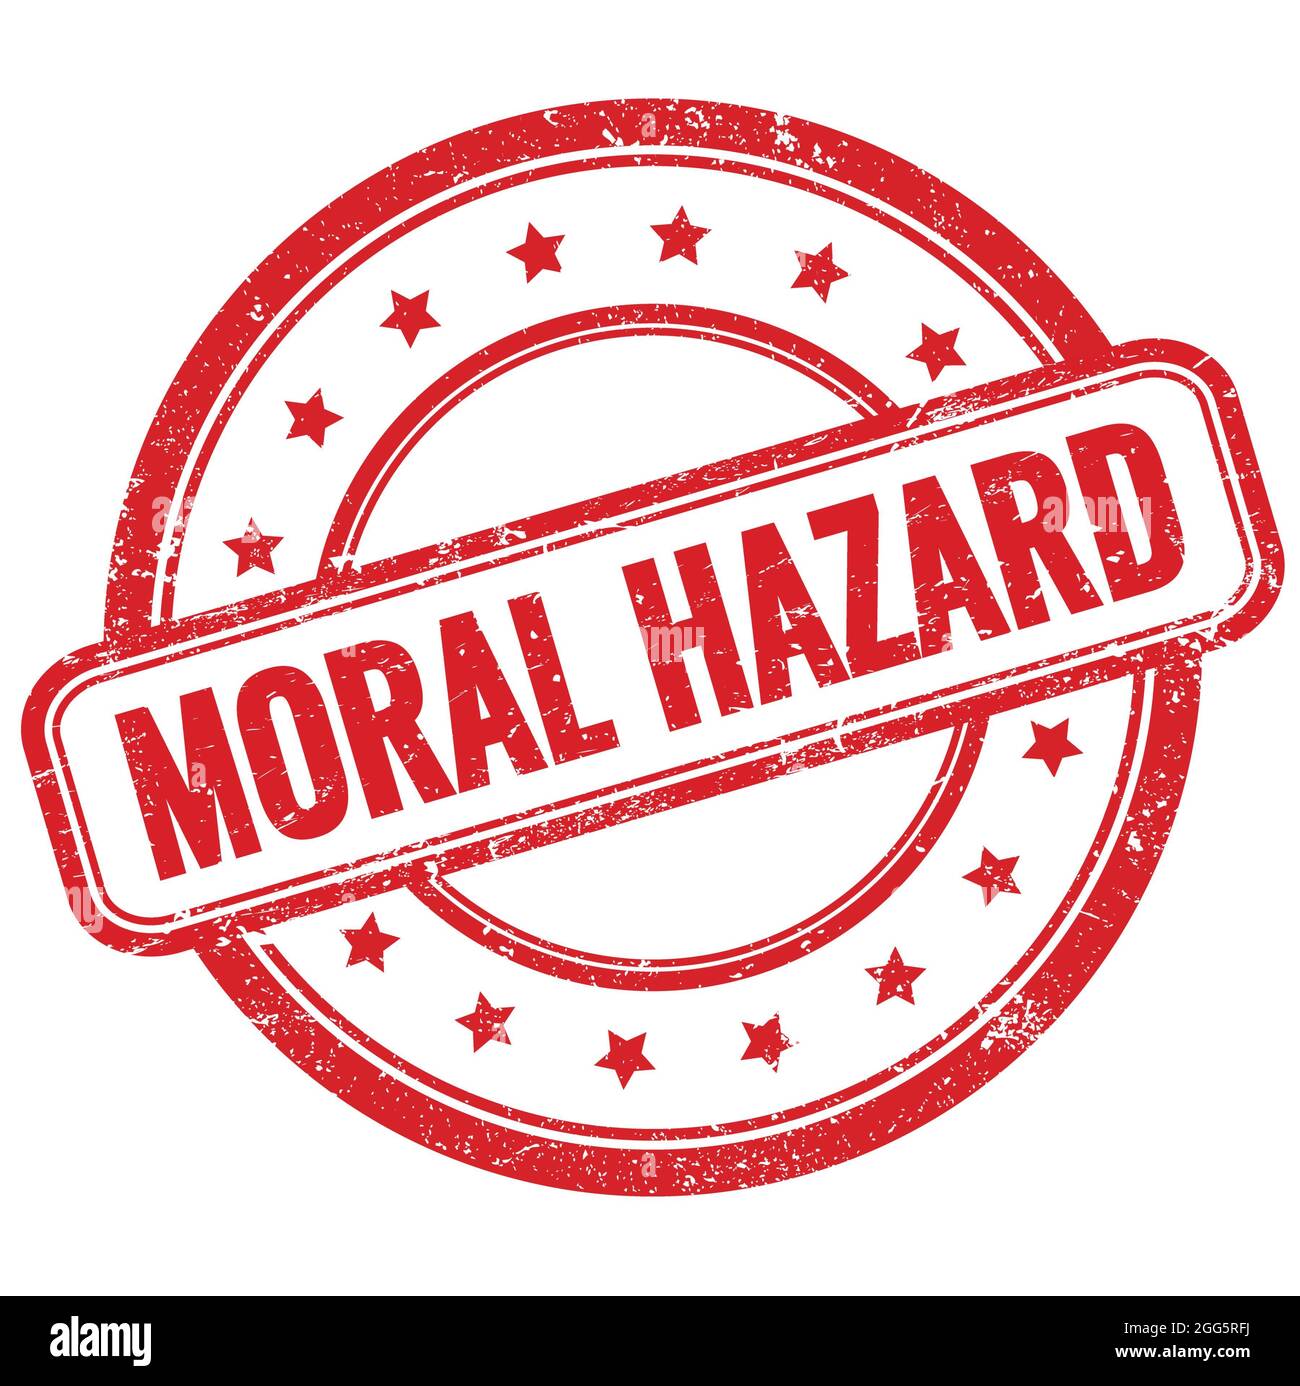 MORAL HAZARD text on red vintage grungy round rubber stamp. Stock Photo